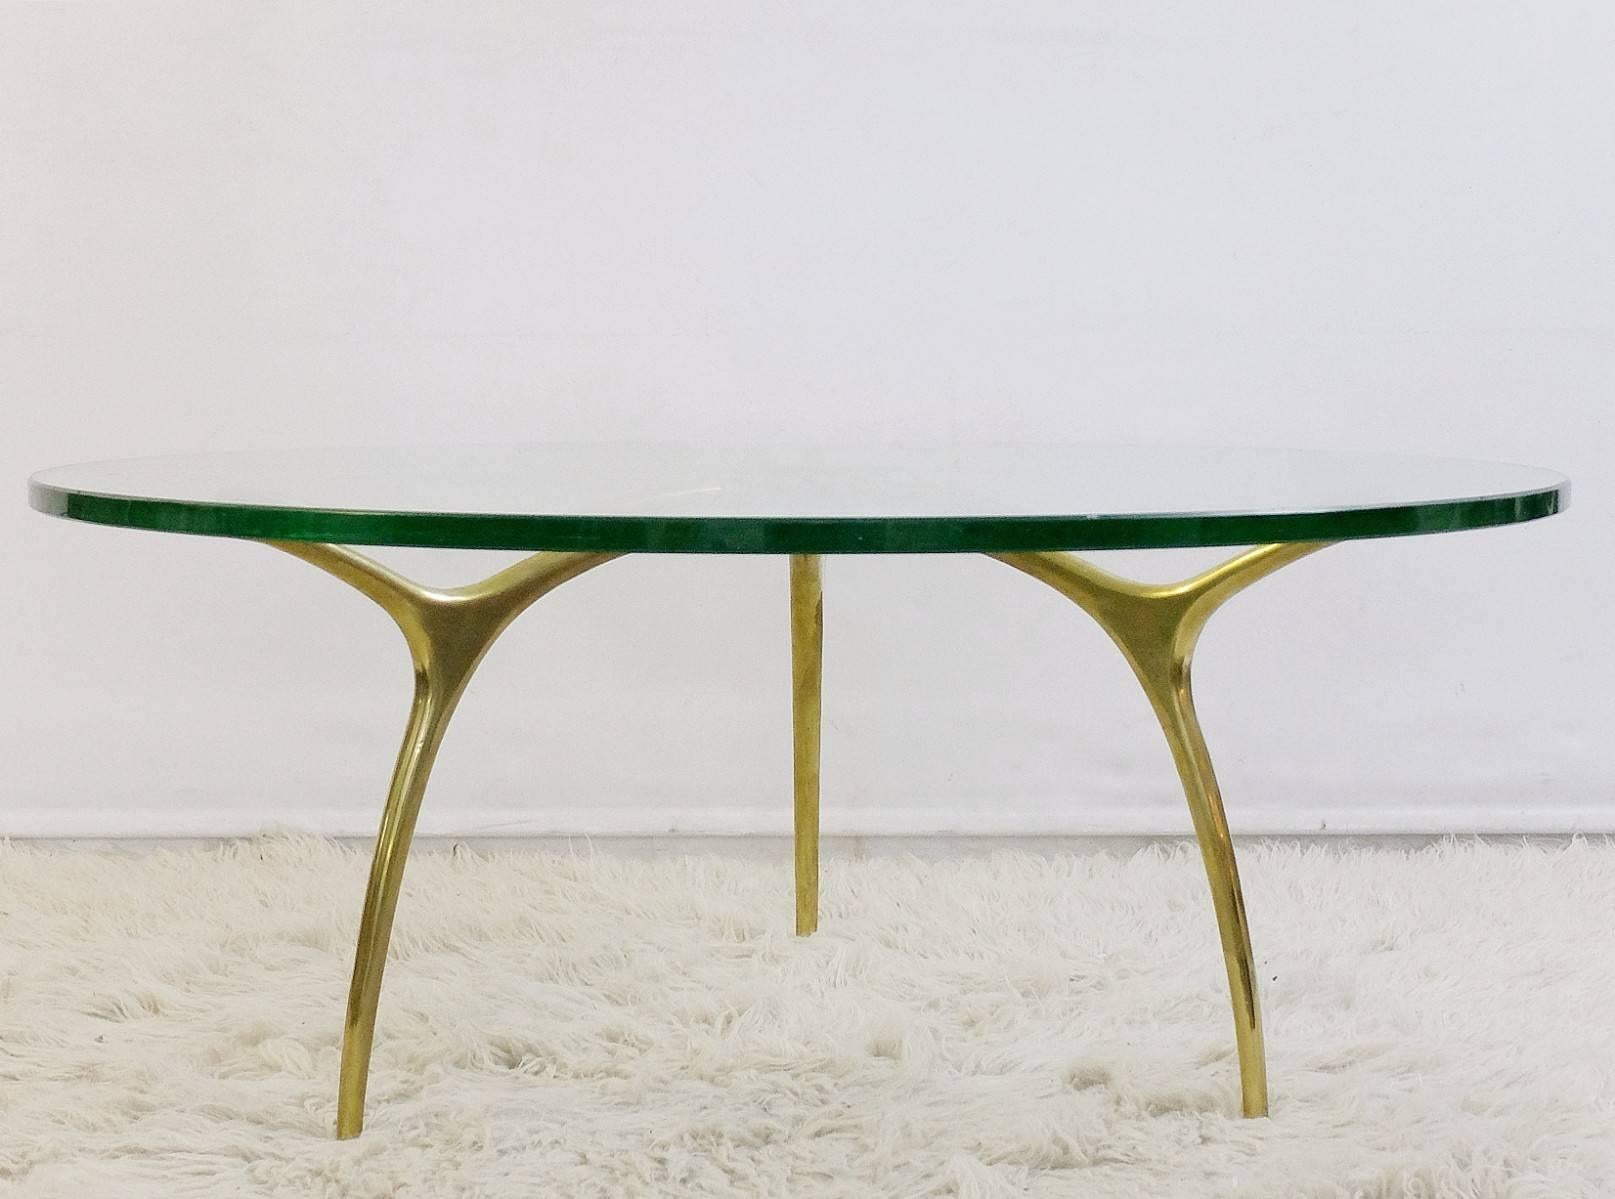 1970s coffee table in glass and polished brass by Belgian designer Kouloufi.